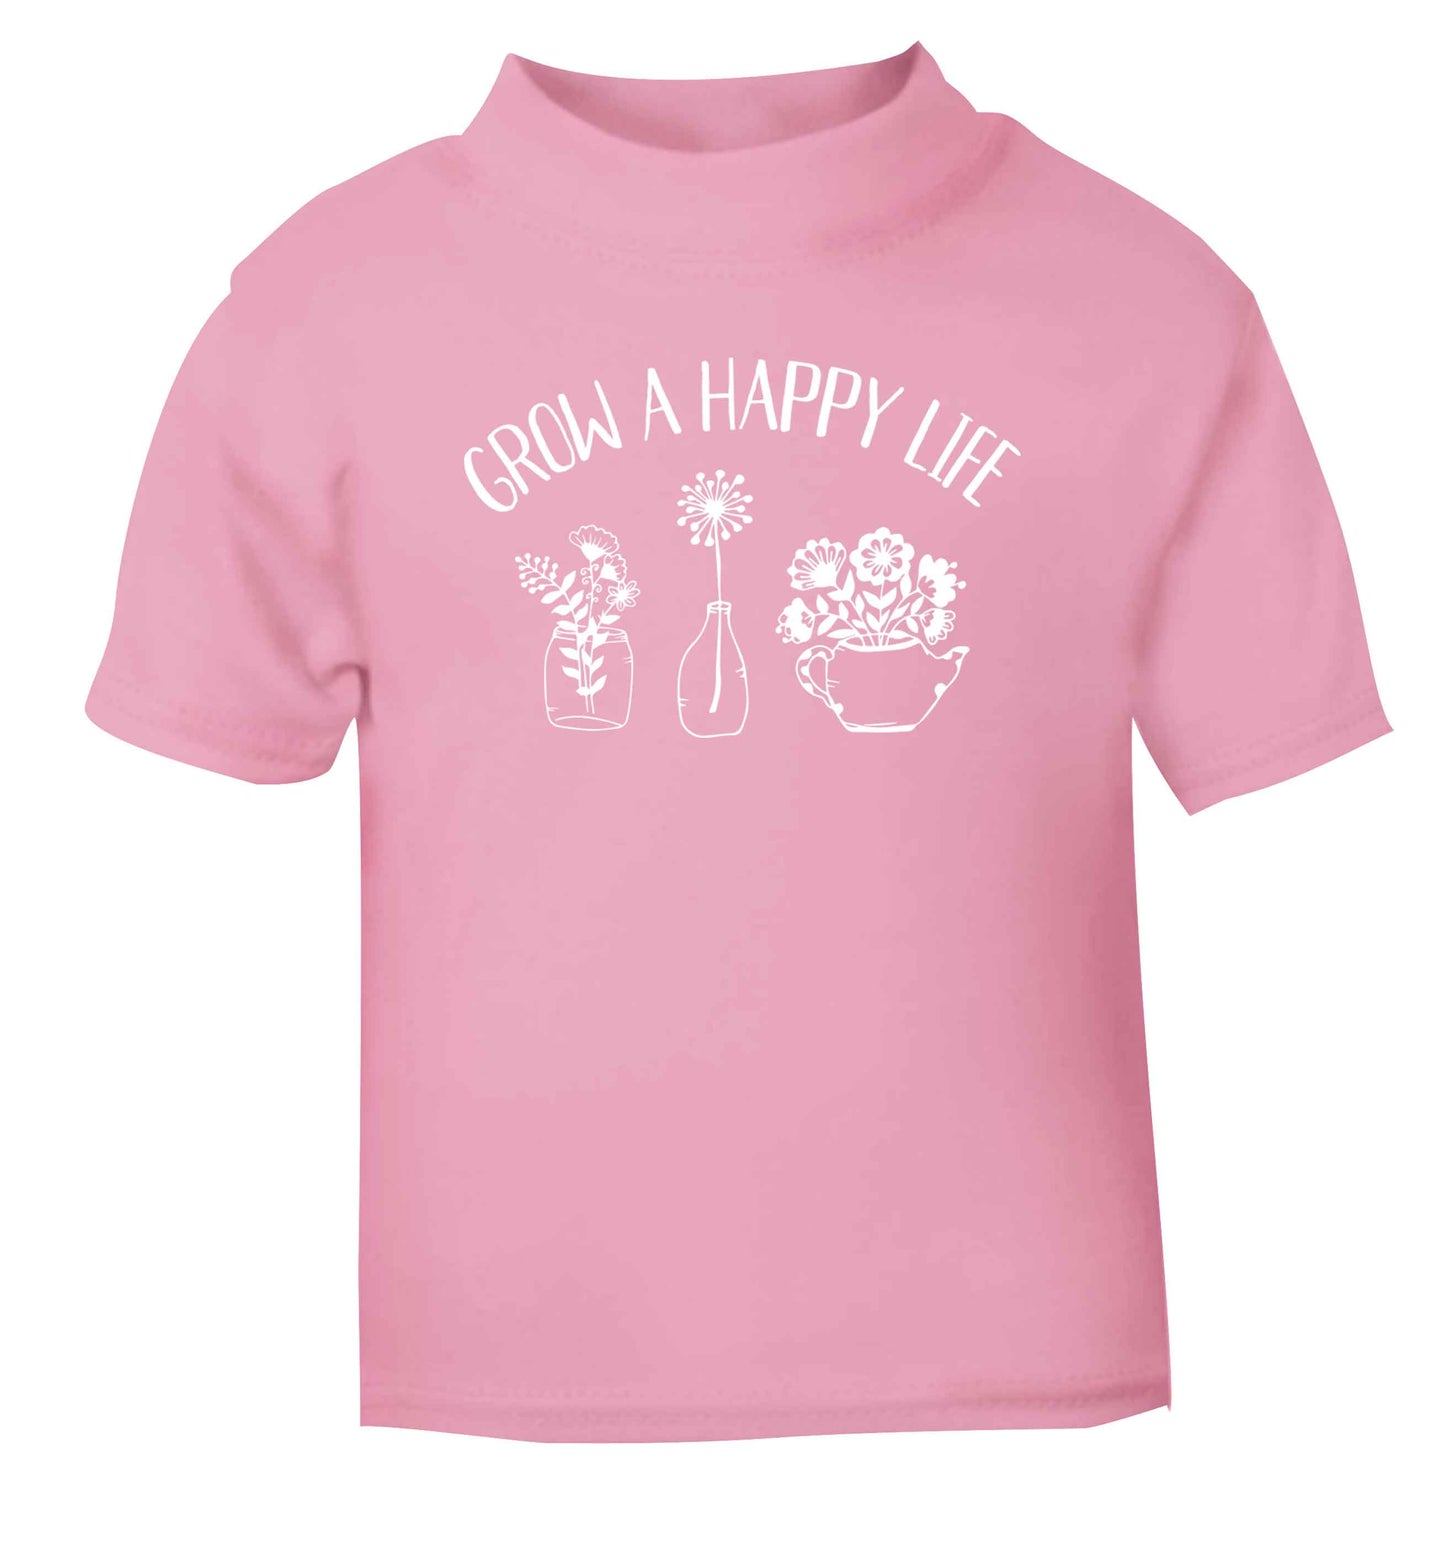 Grow a happy life light pink Baby Toddler Tshirt 2 Years